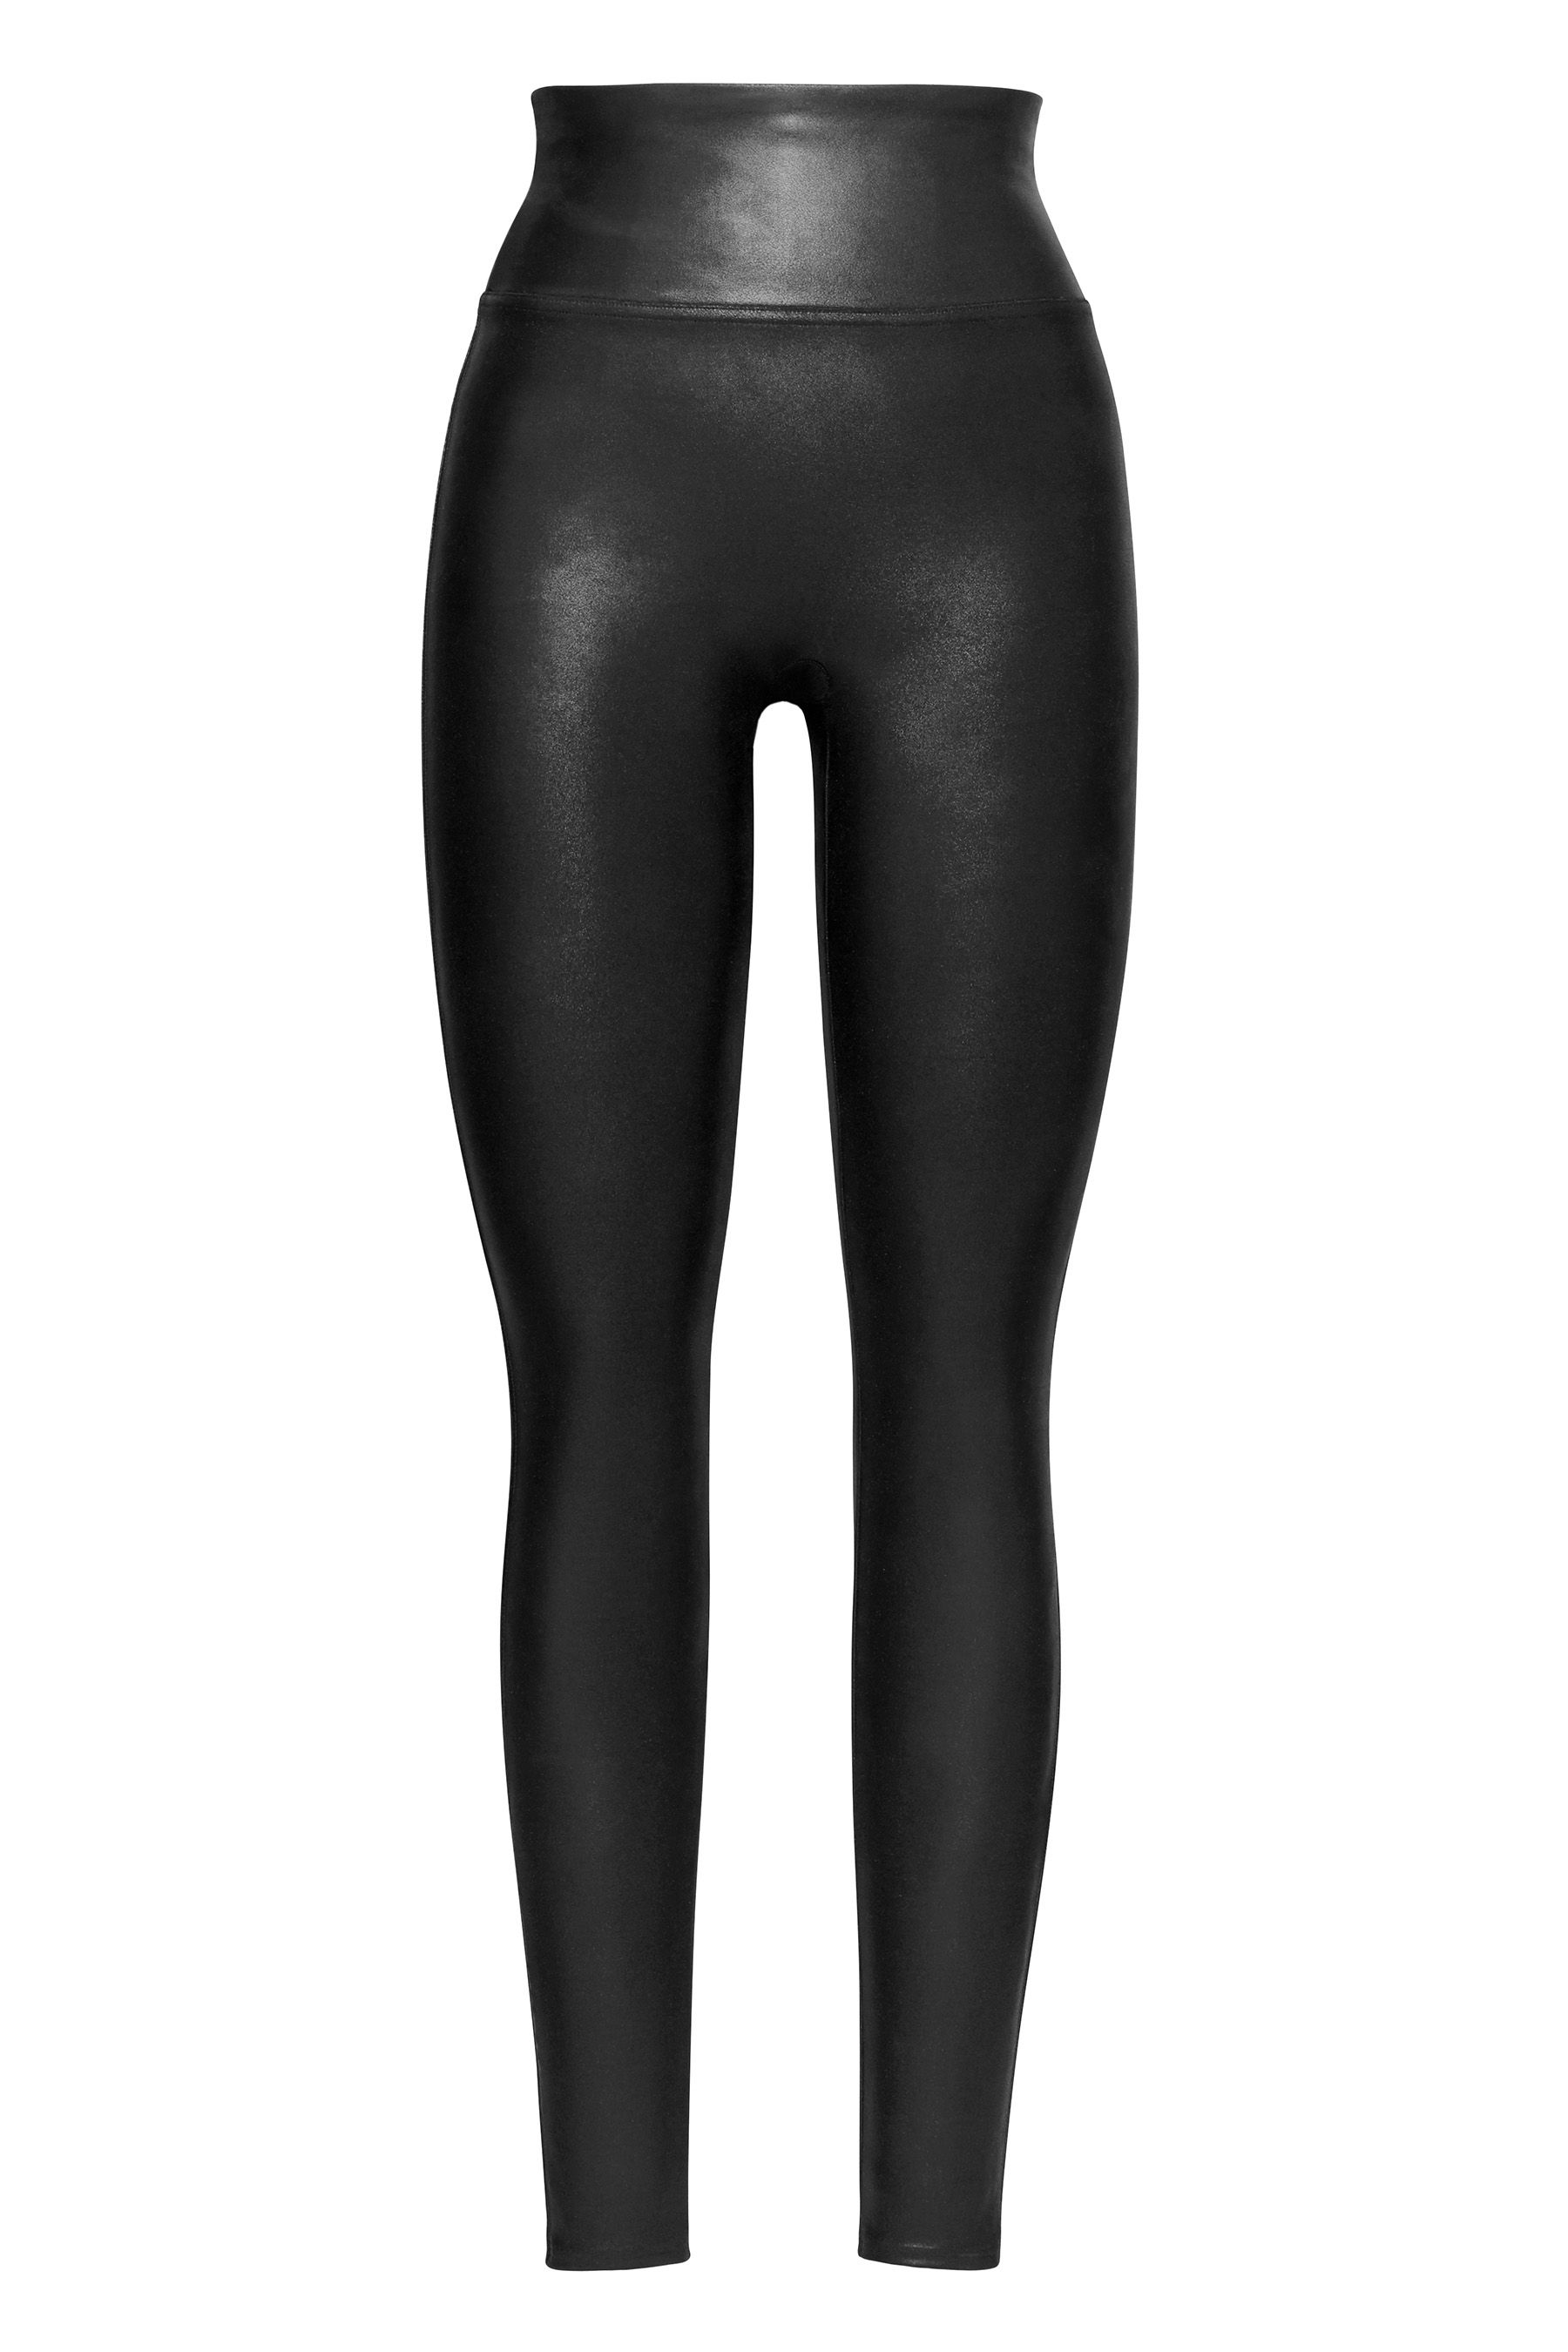 Buy SPANX® Medium Control Black Faux Leather Shaping Leggings from the